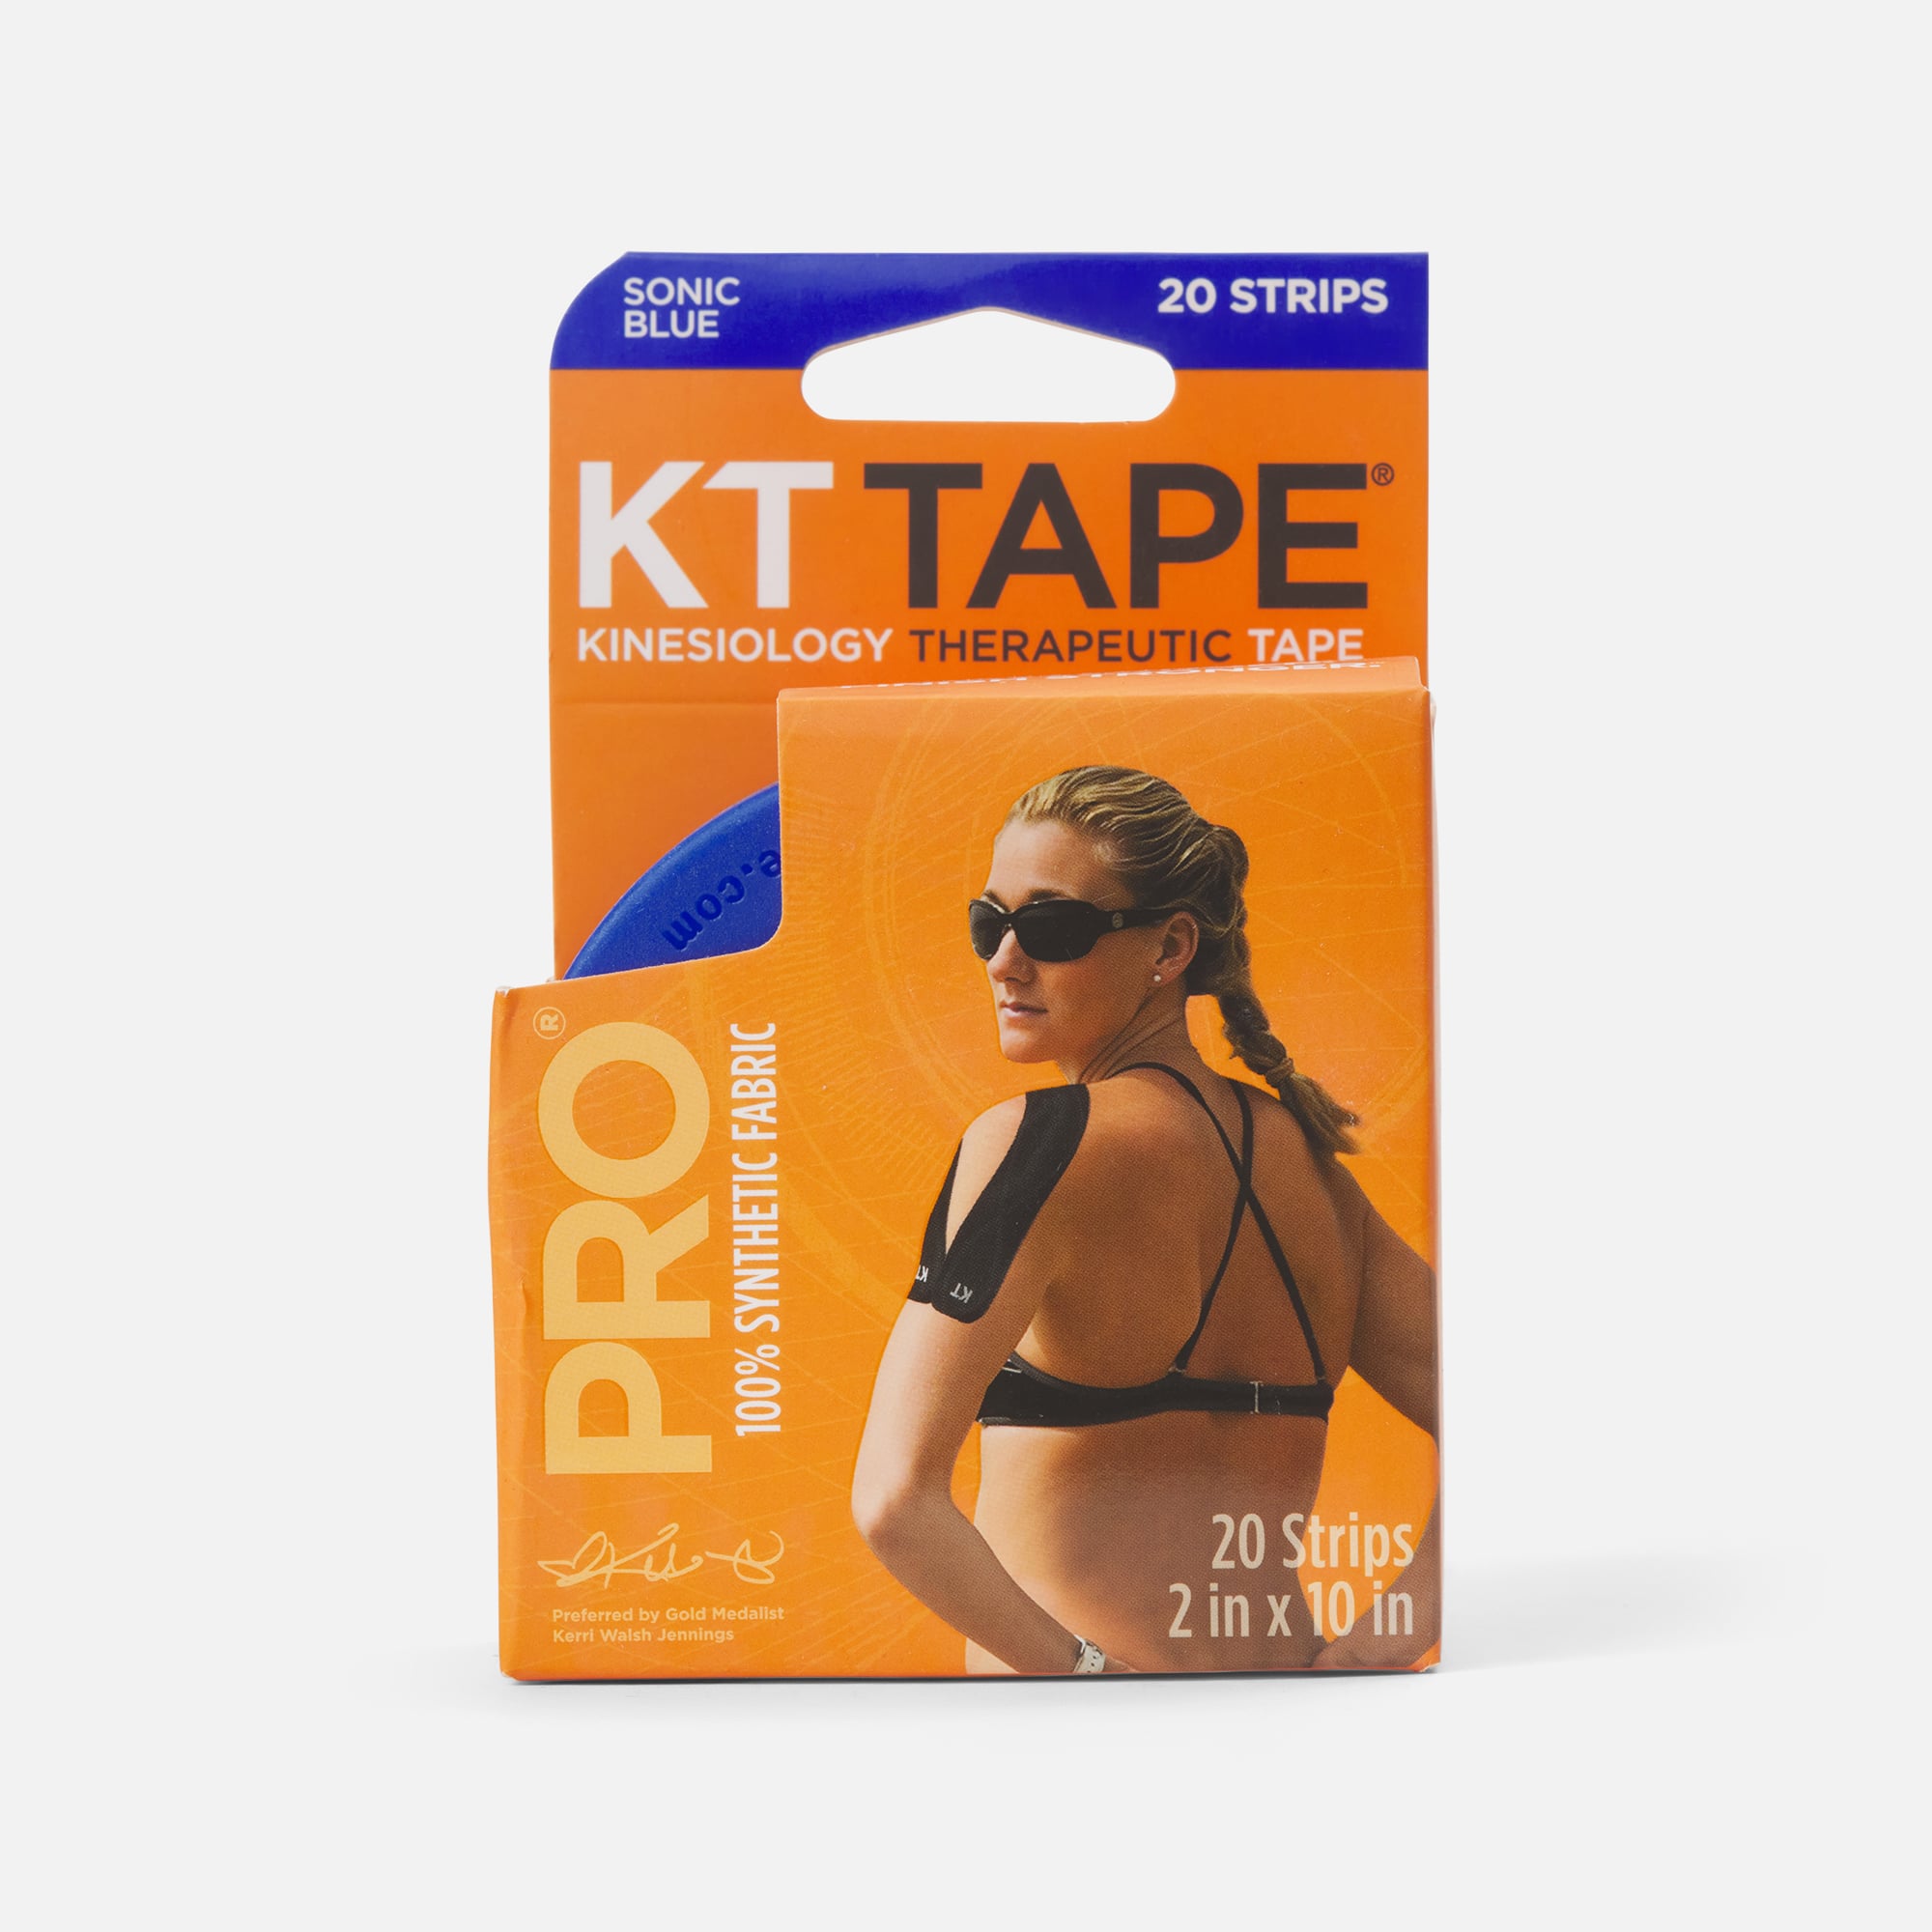 HSA Eligible  KT Tape Pro Synthetic Tape - Sonic Blue, 20 ct.